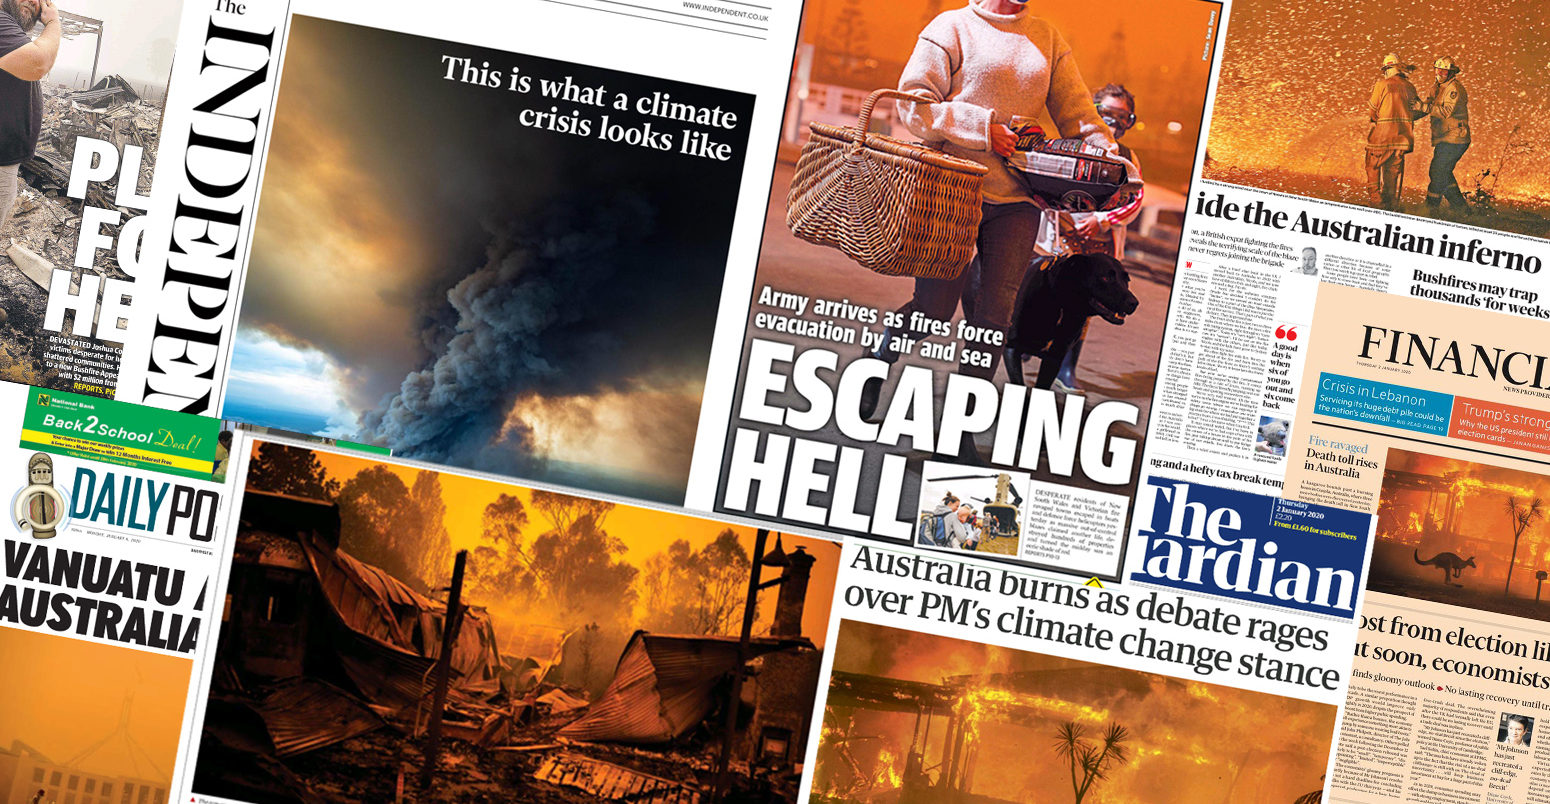 Collage of global media coverage of the Australian wildfires. Credit: Carbon Brief.